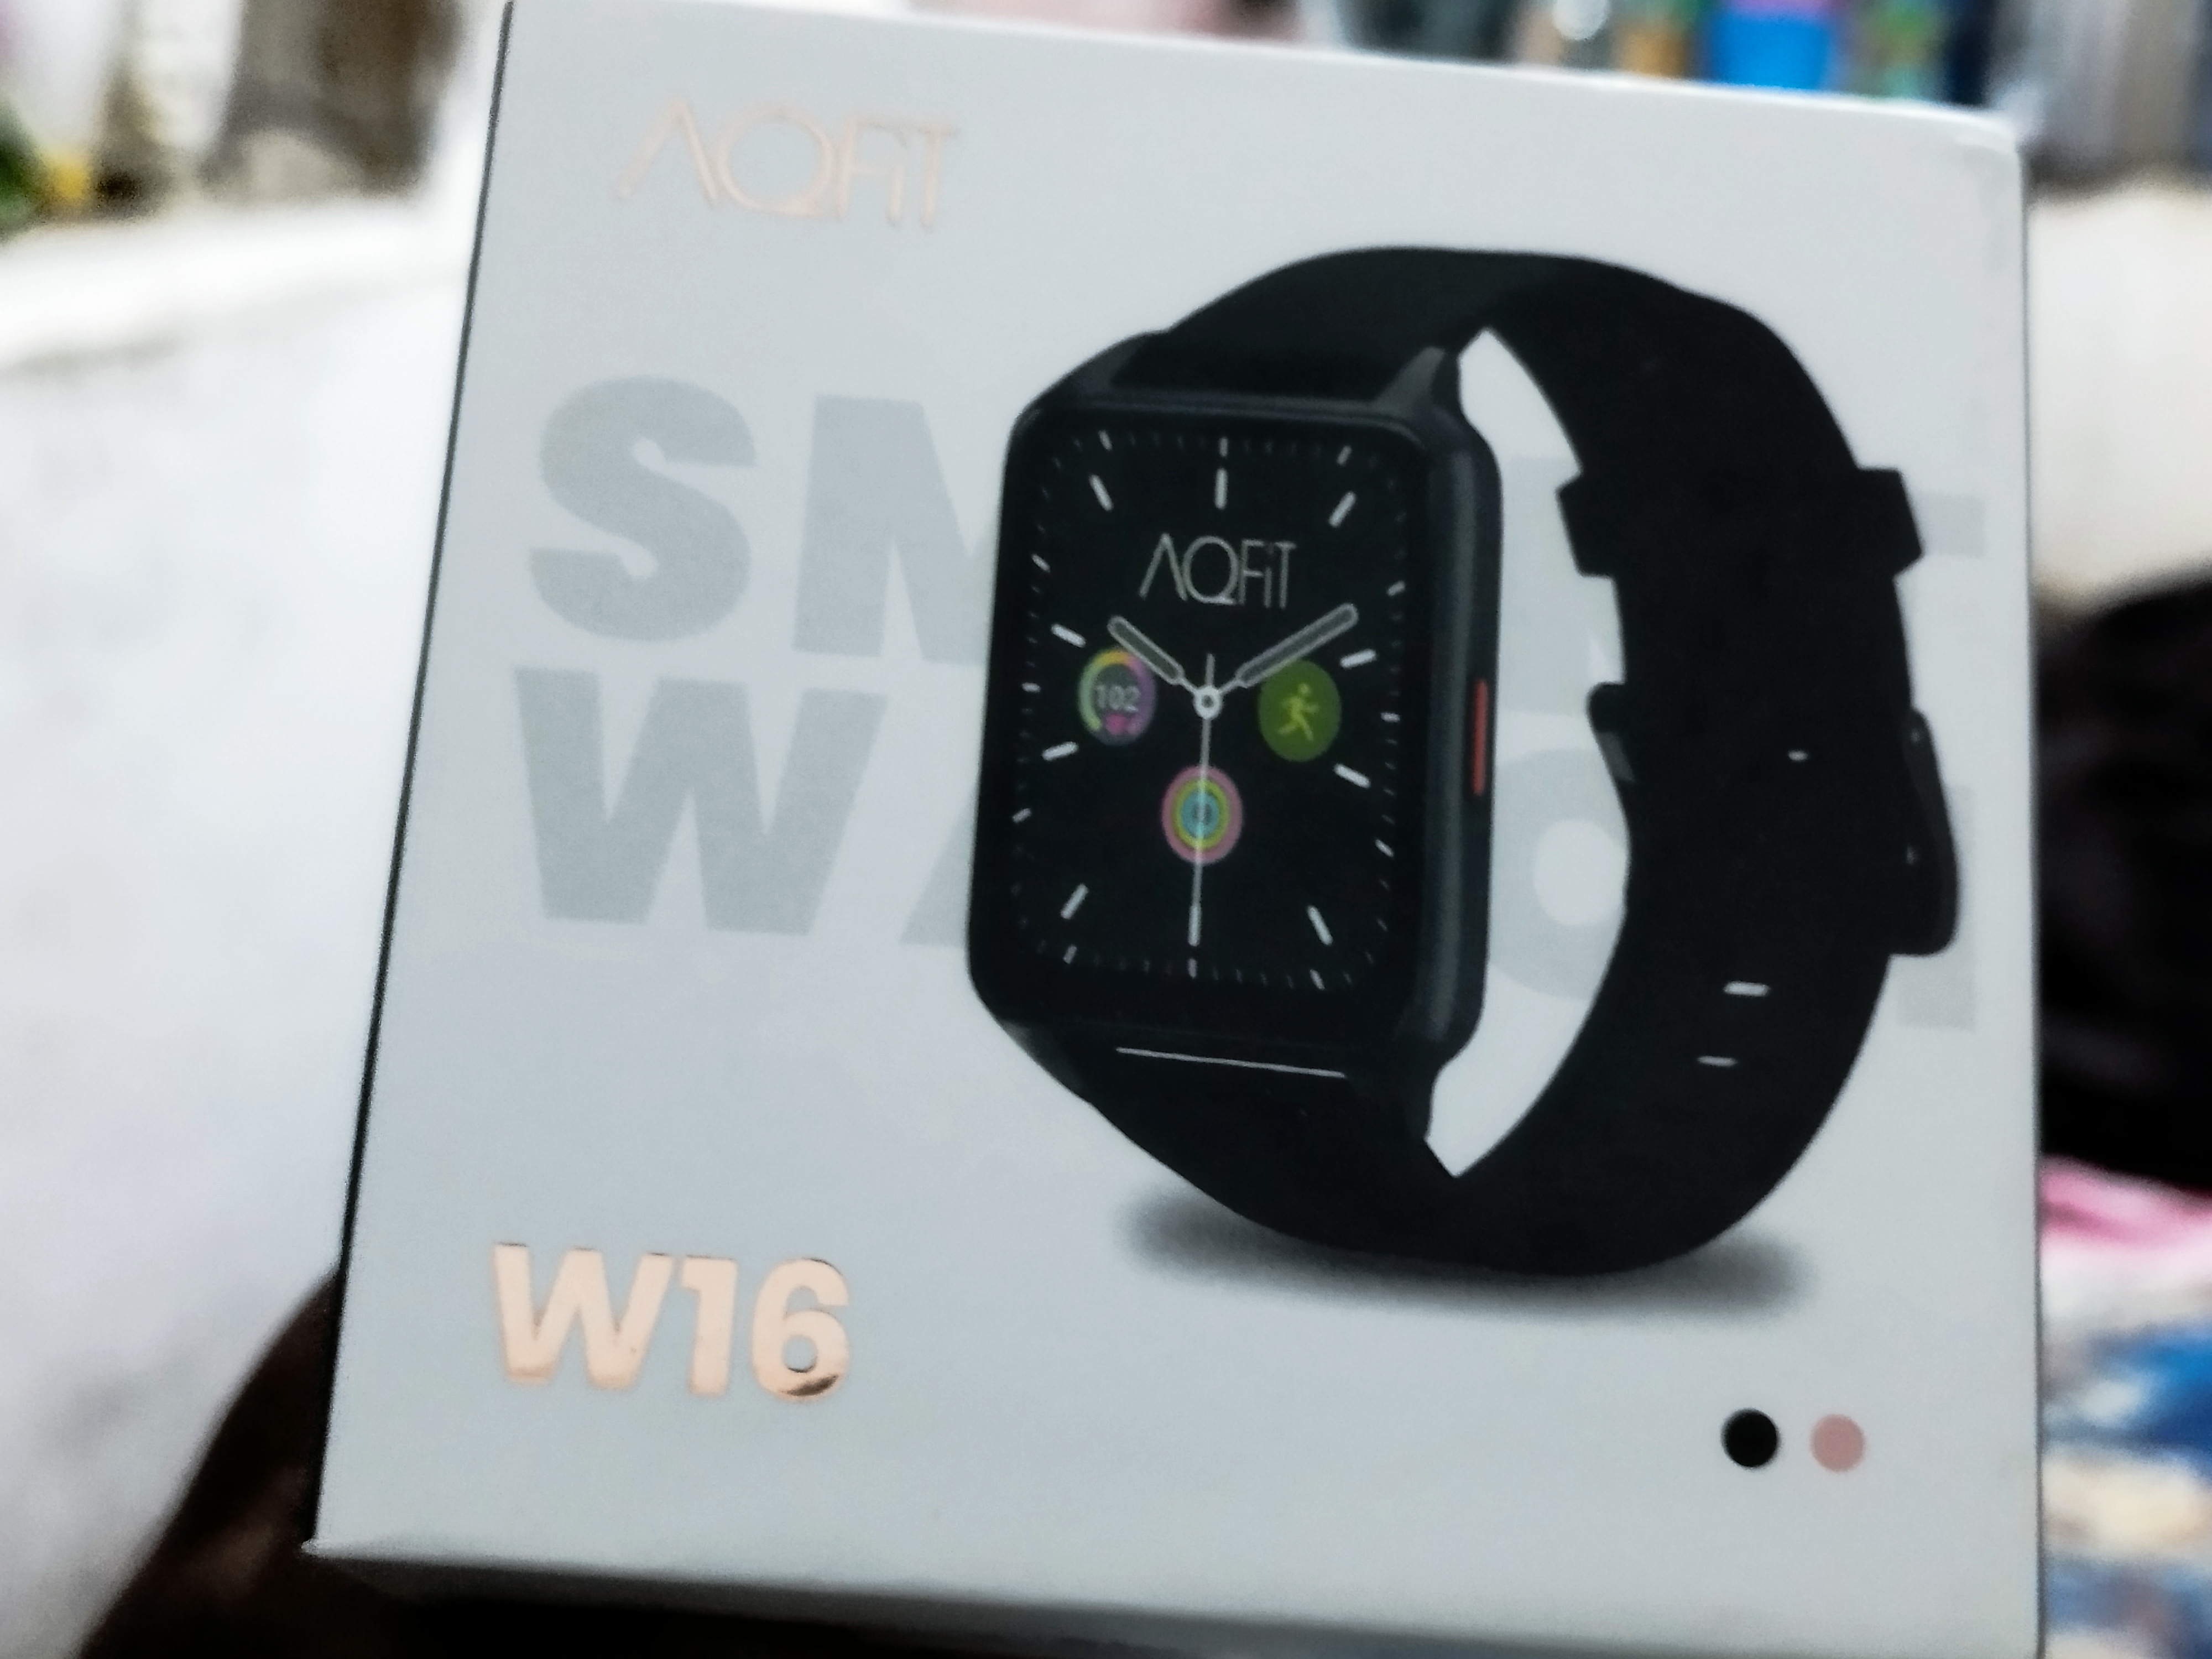 AQFIT W9 Quad 1.69 inch BT Calling with Voice Assistant Smartwatch Price in  India - Buy AQFIT W9 Quad 1.69 inch BT Calling with Voice Assistant  Smartwatch online at Flipkart.com